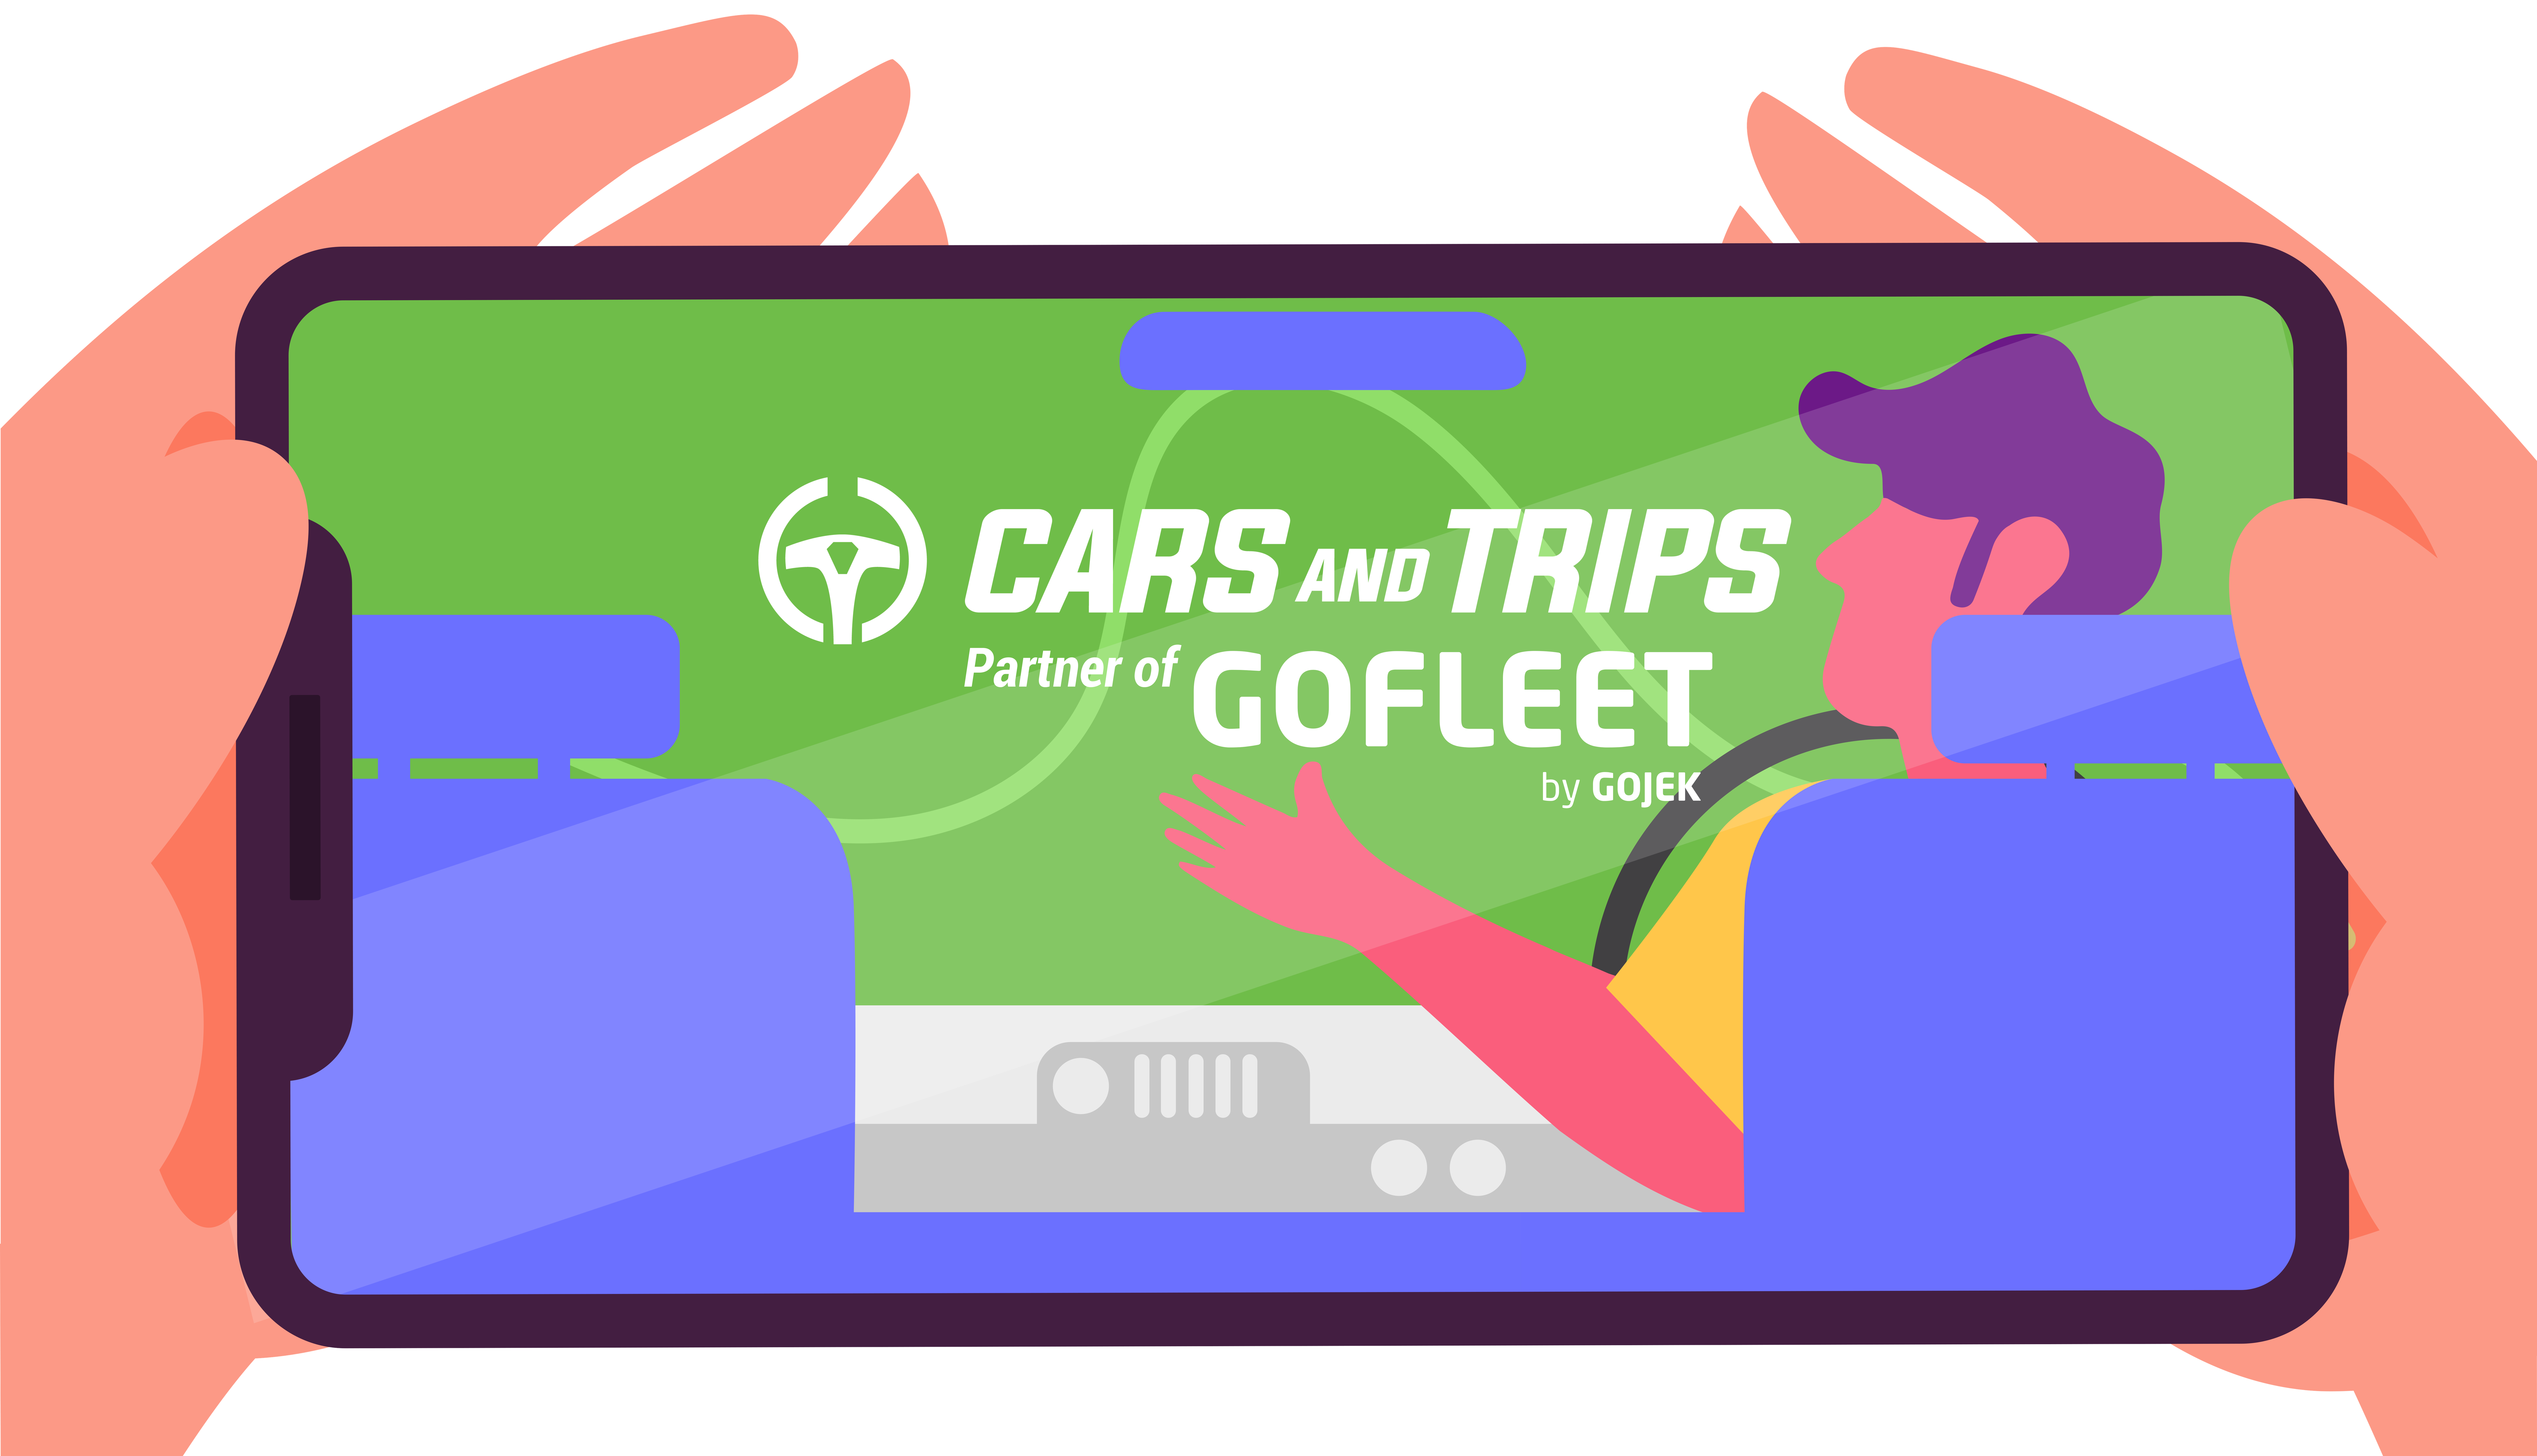 Go-Fleet rebate with Cars and Trips